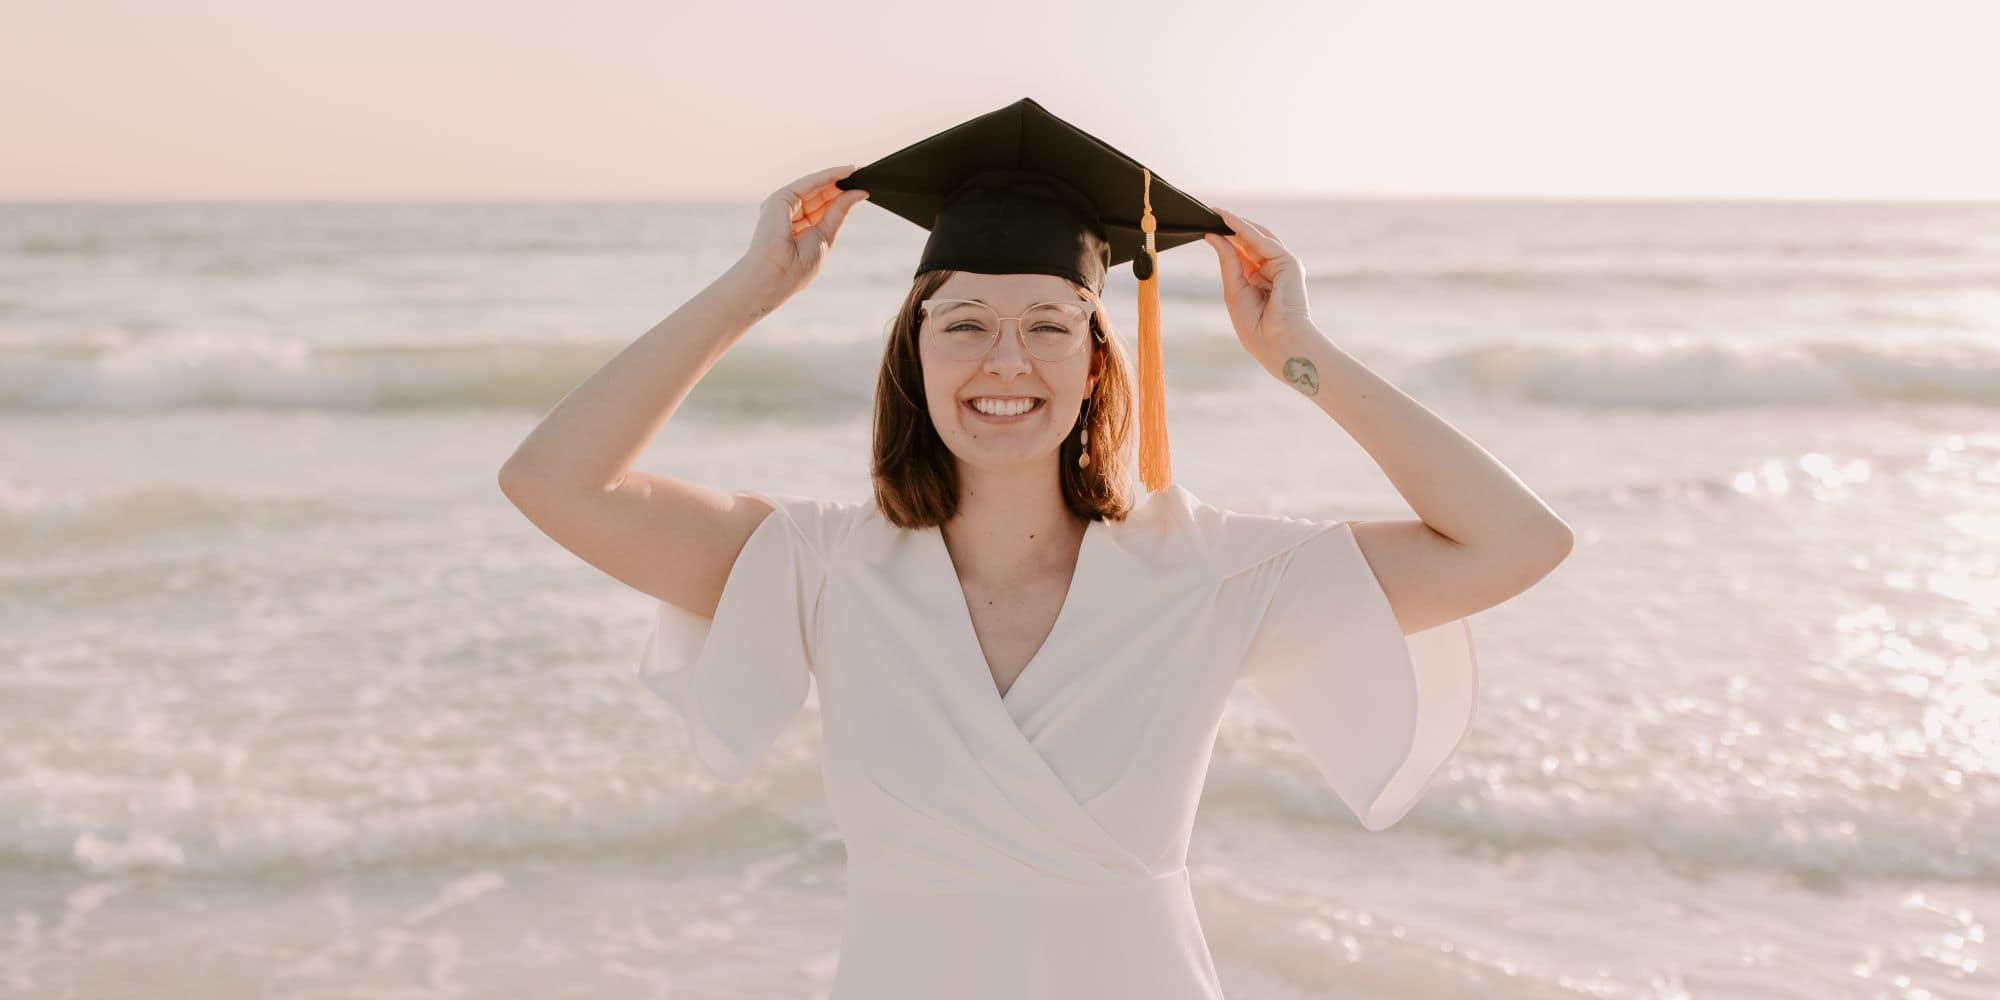 M.S. in Aviation grad Kayla Taylor celebrates completing her master’s program by modeling her graduation cap on the beach. (Photo: Alyssa Shrock)